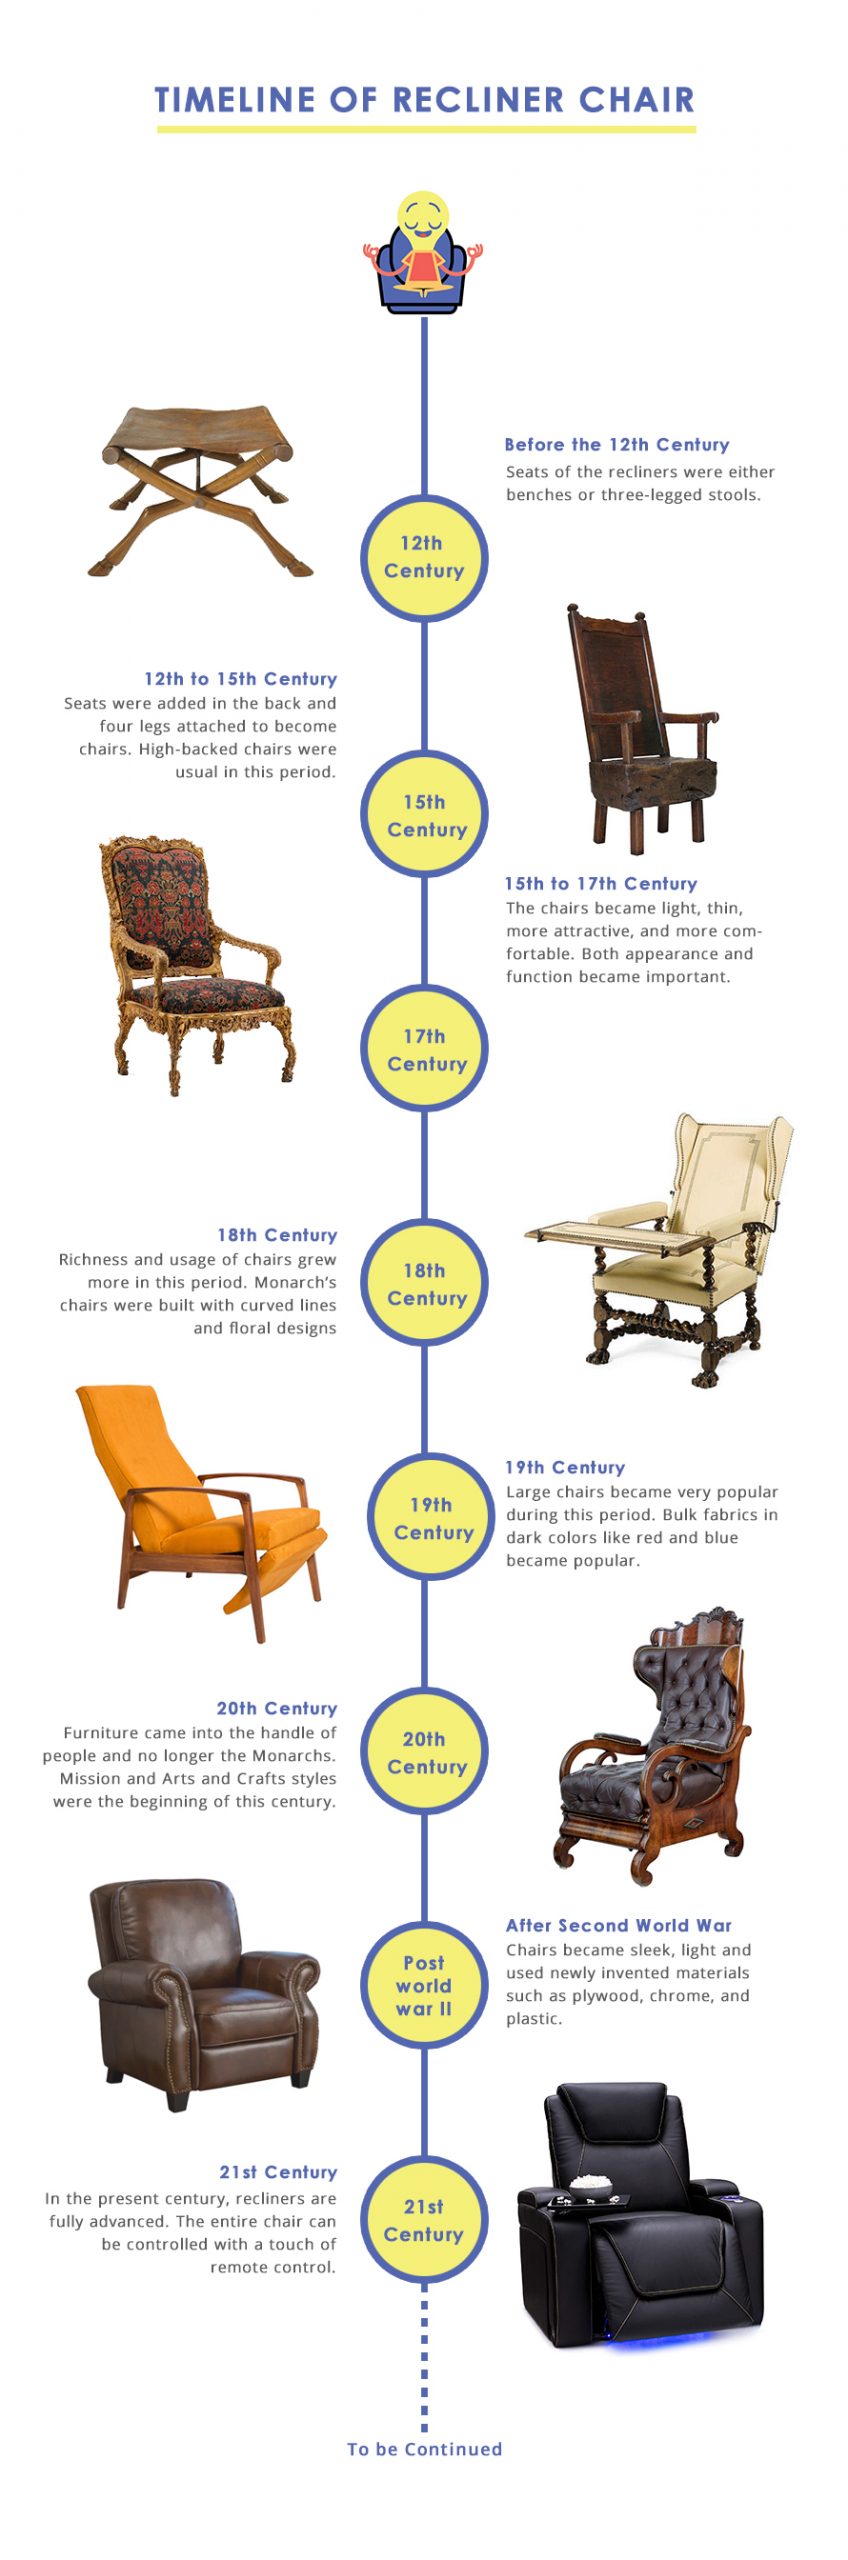 Timeline of Recliner Chairs